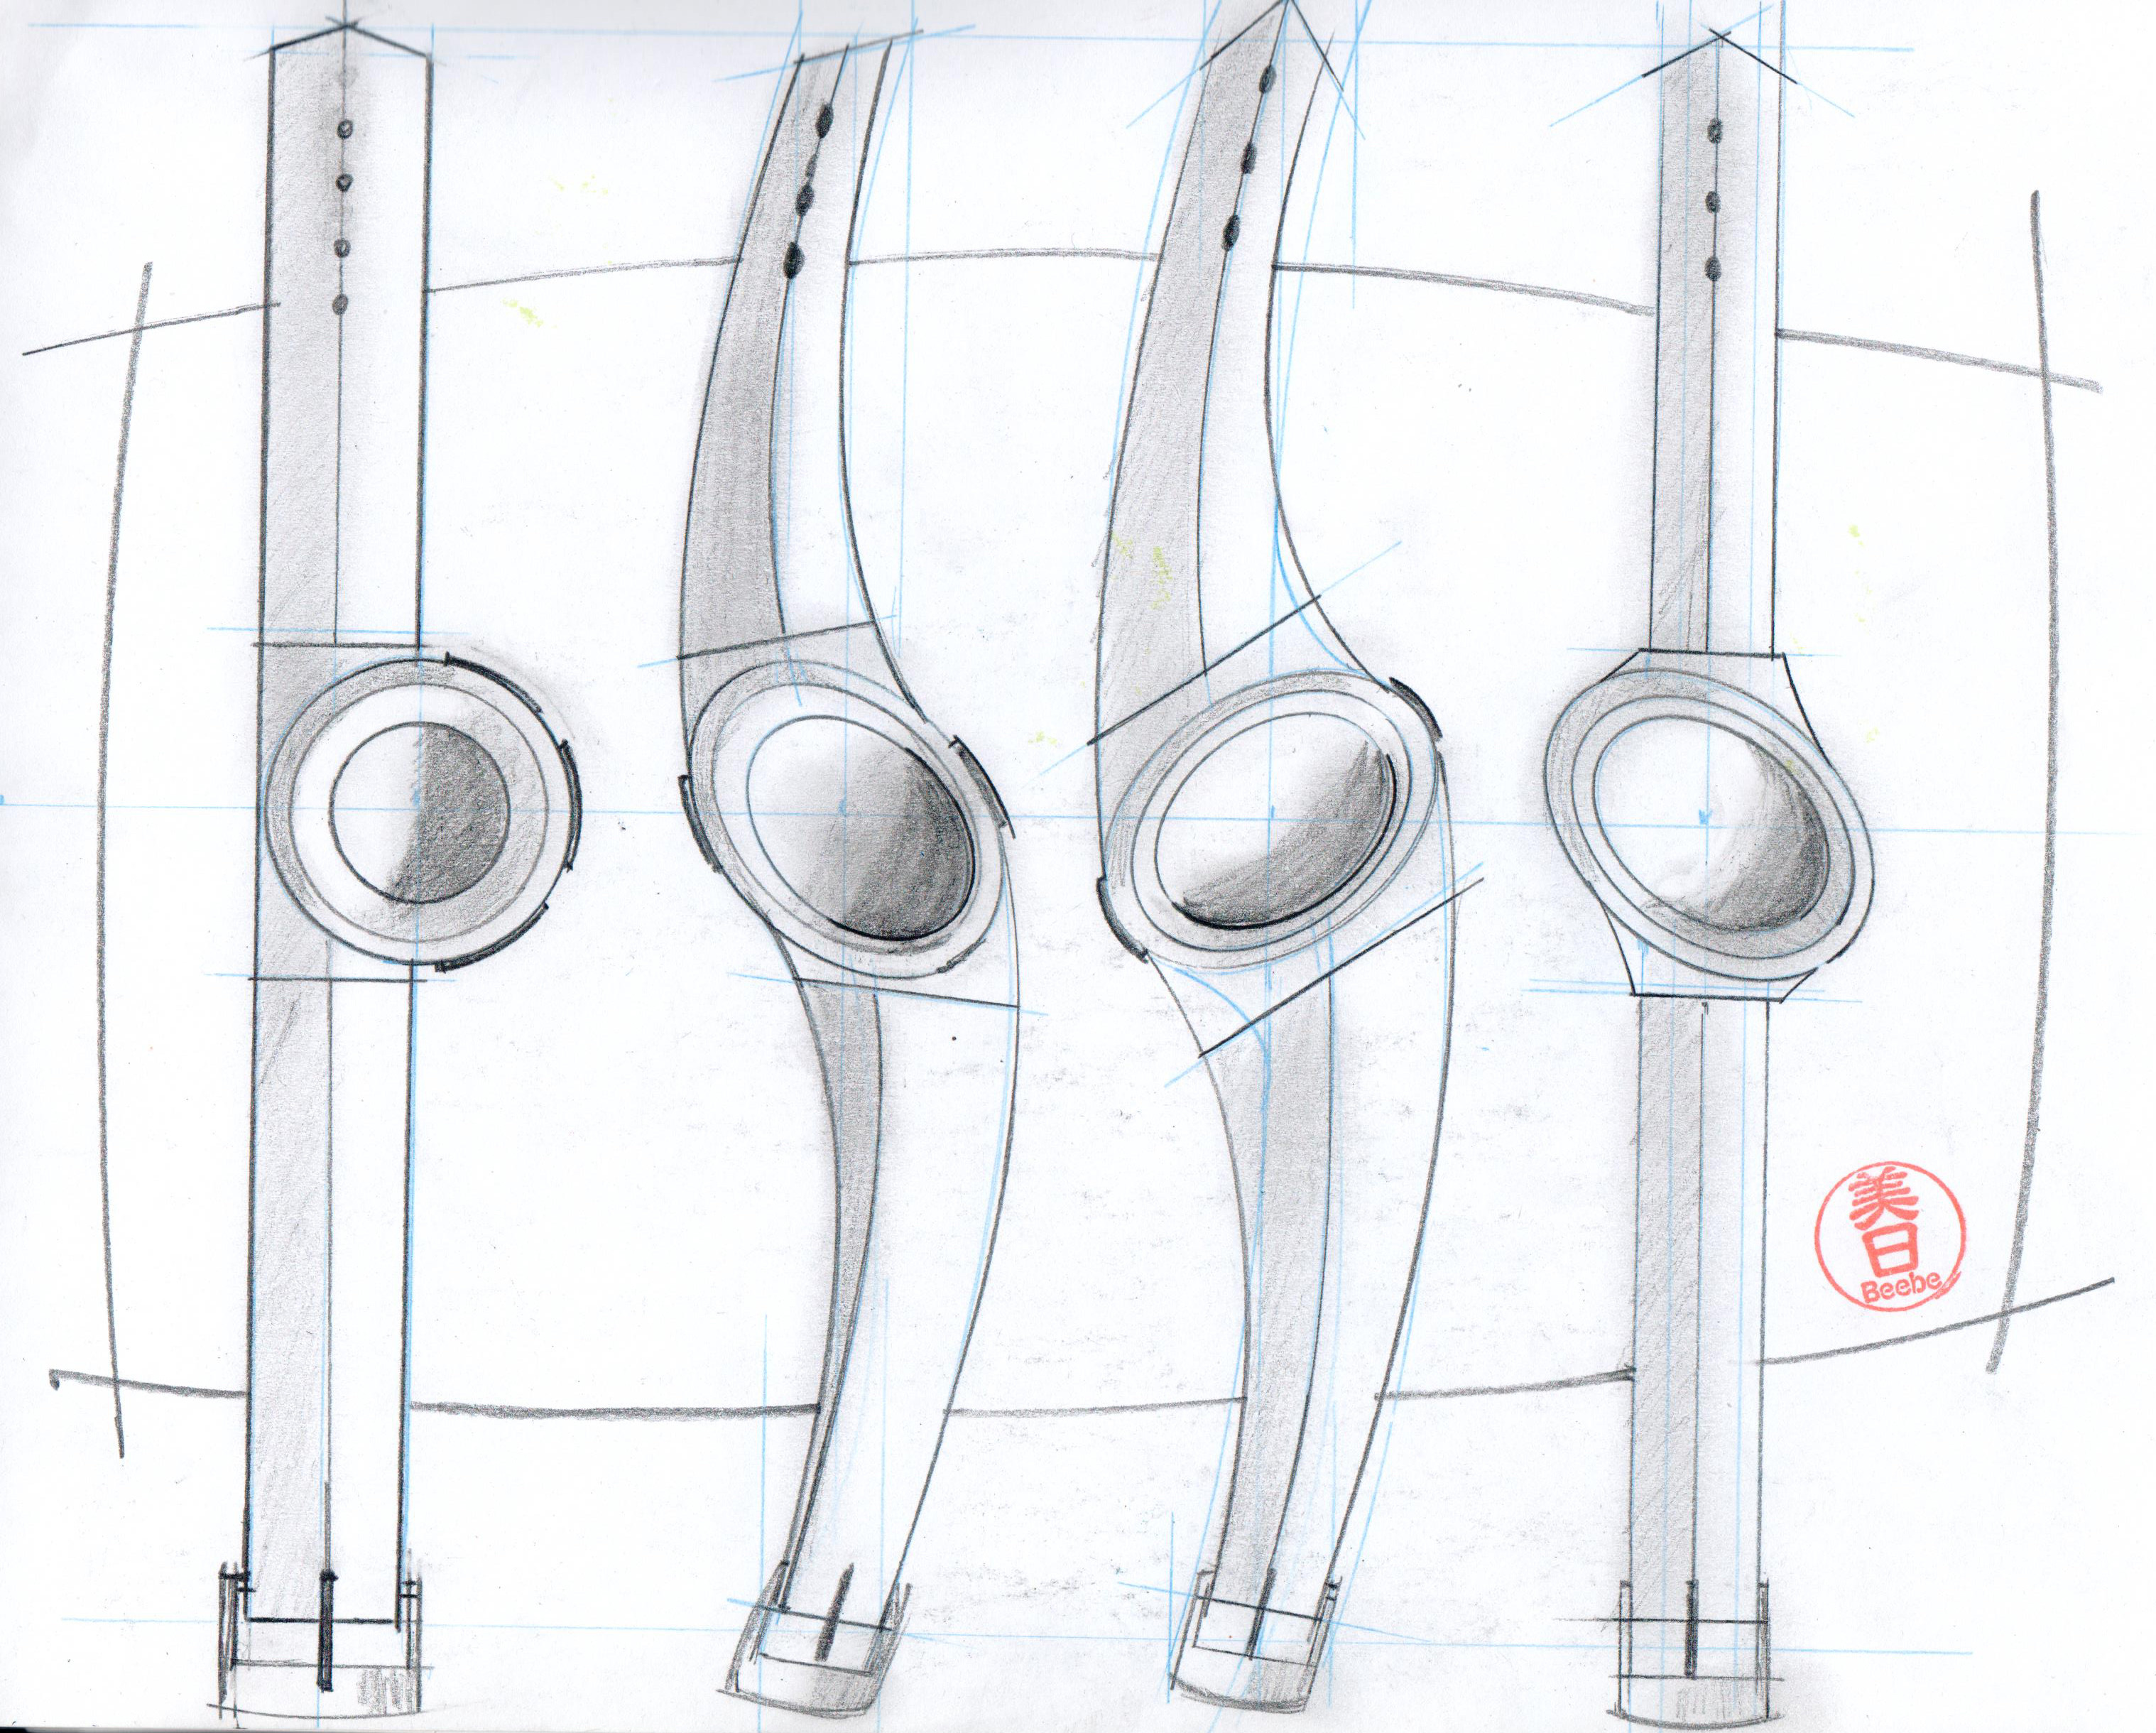 Early watch concepts.